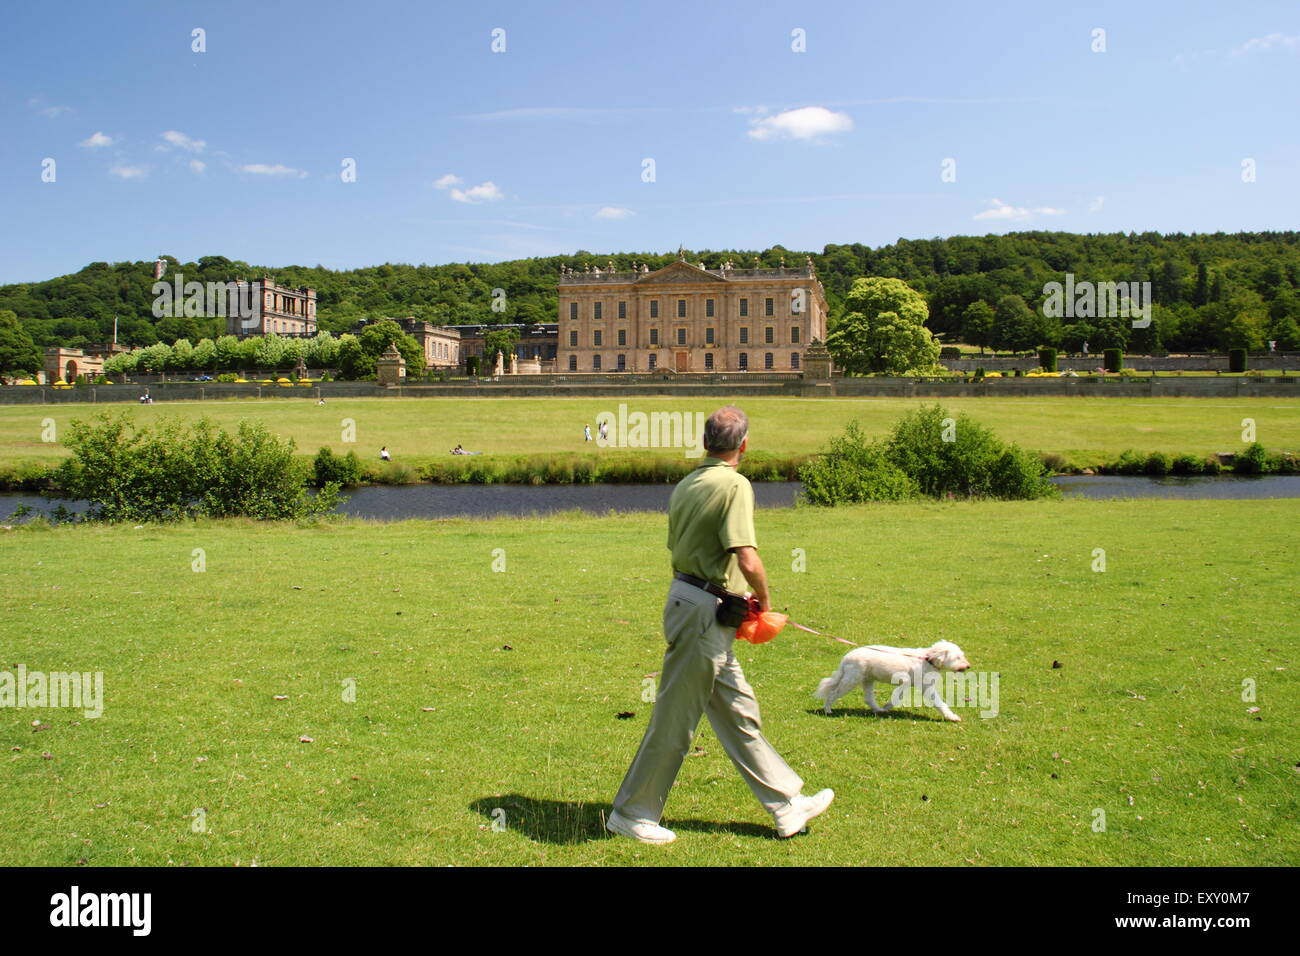 A man walks a dog through the parkland surrounding Chatsworth House (pictured) in the Peak District, Derbyshre, UK - summer Stock Photo